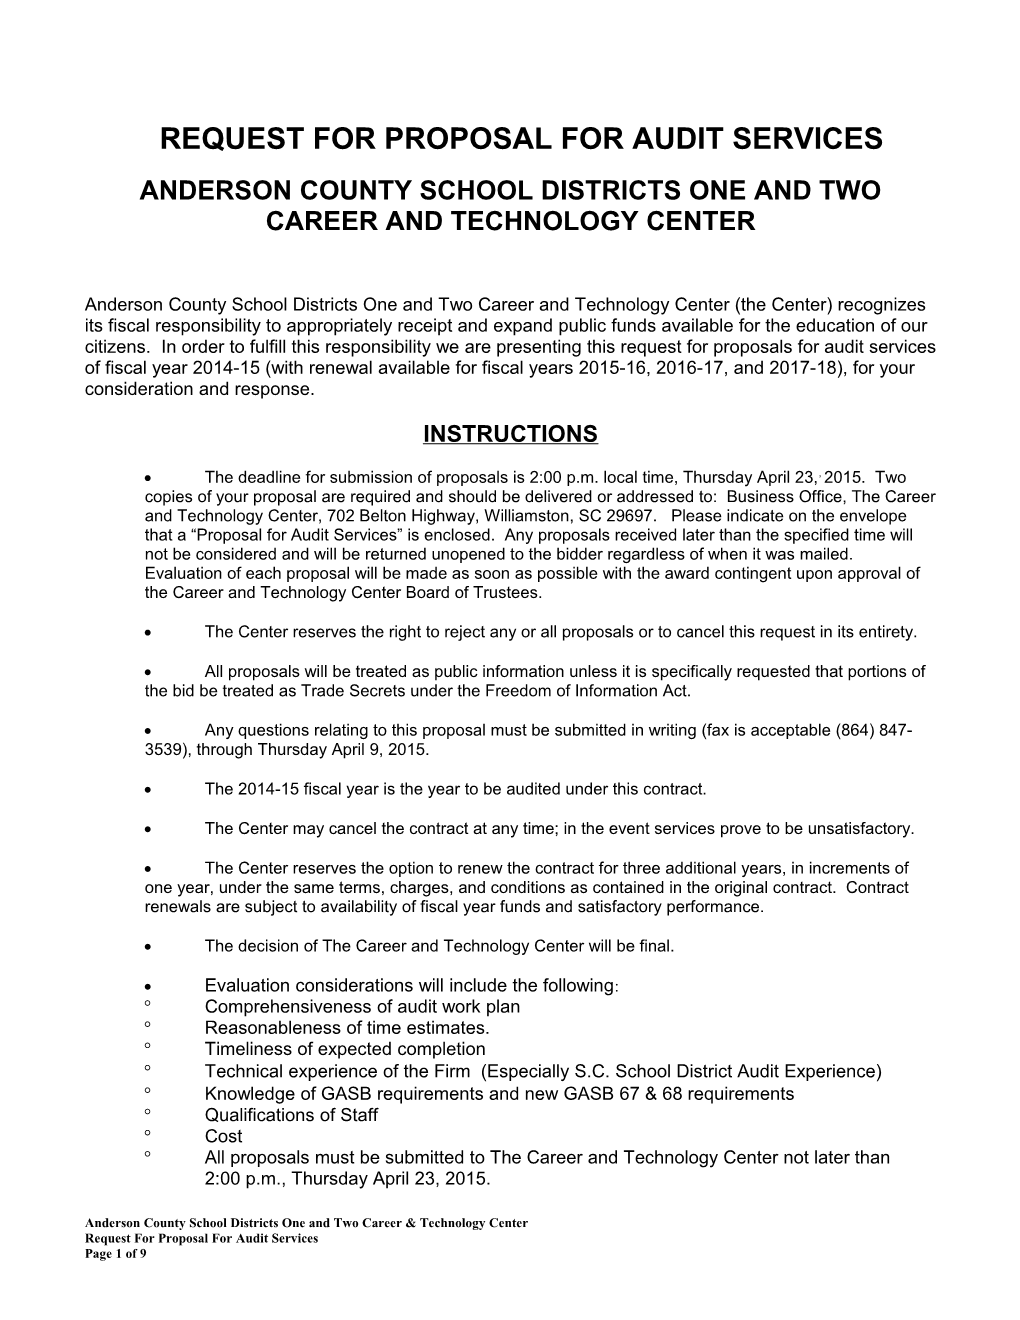 Anderson County School Districts One and Two